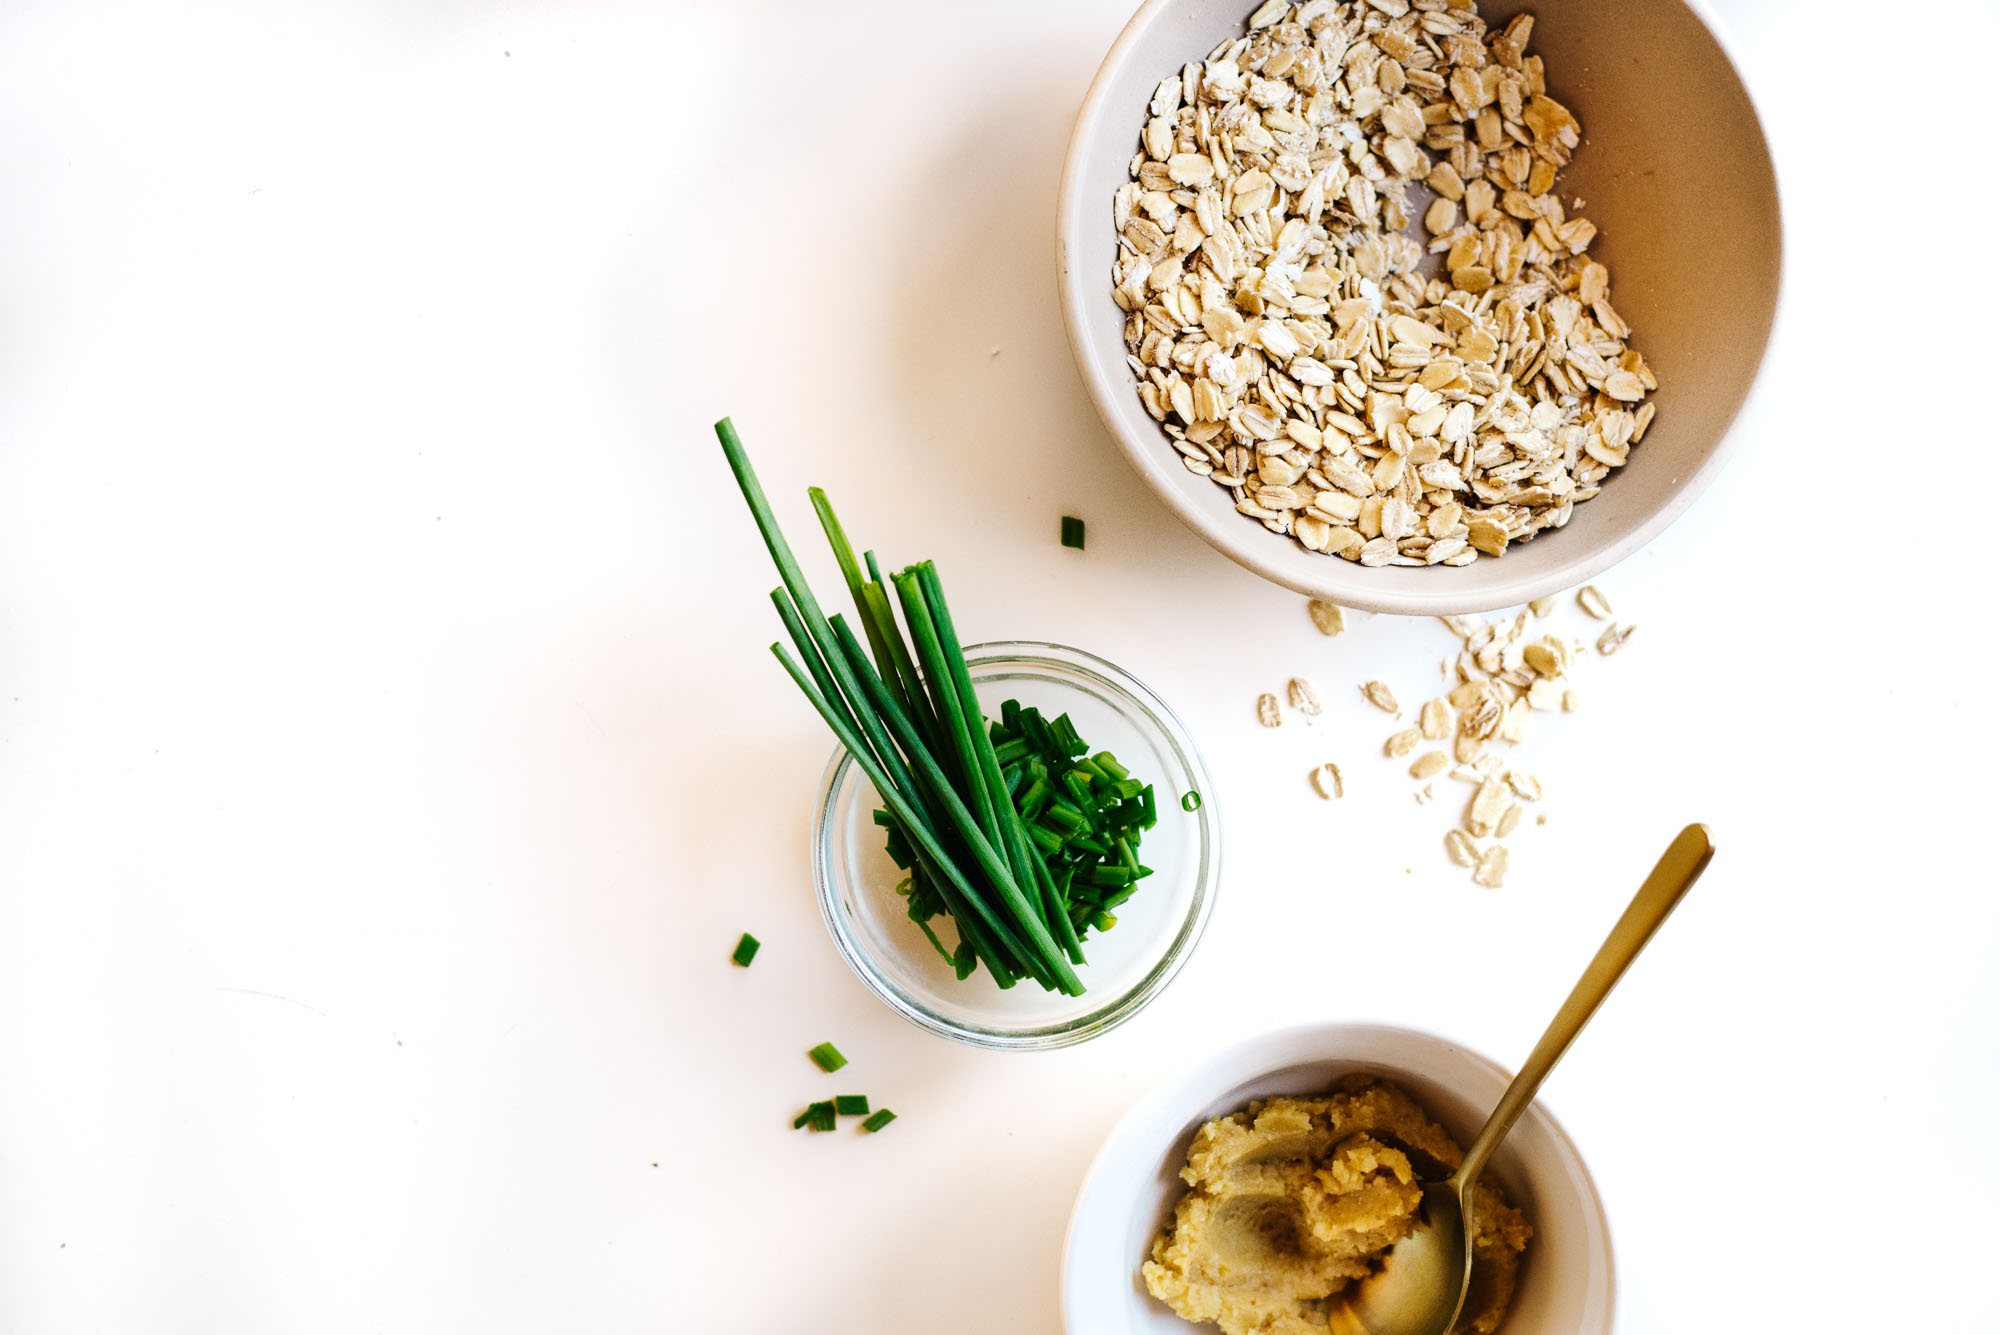 Miso Oats with Scallions + Sesame Oil from More With Less